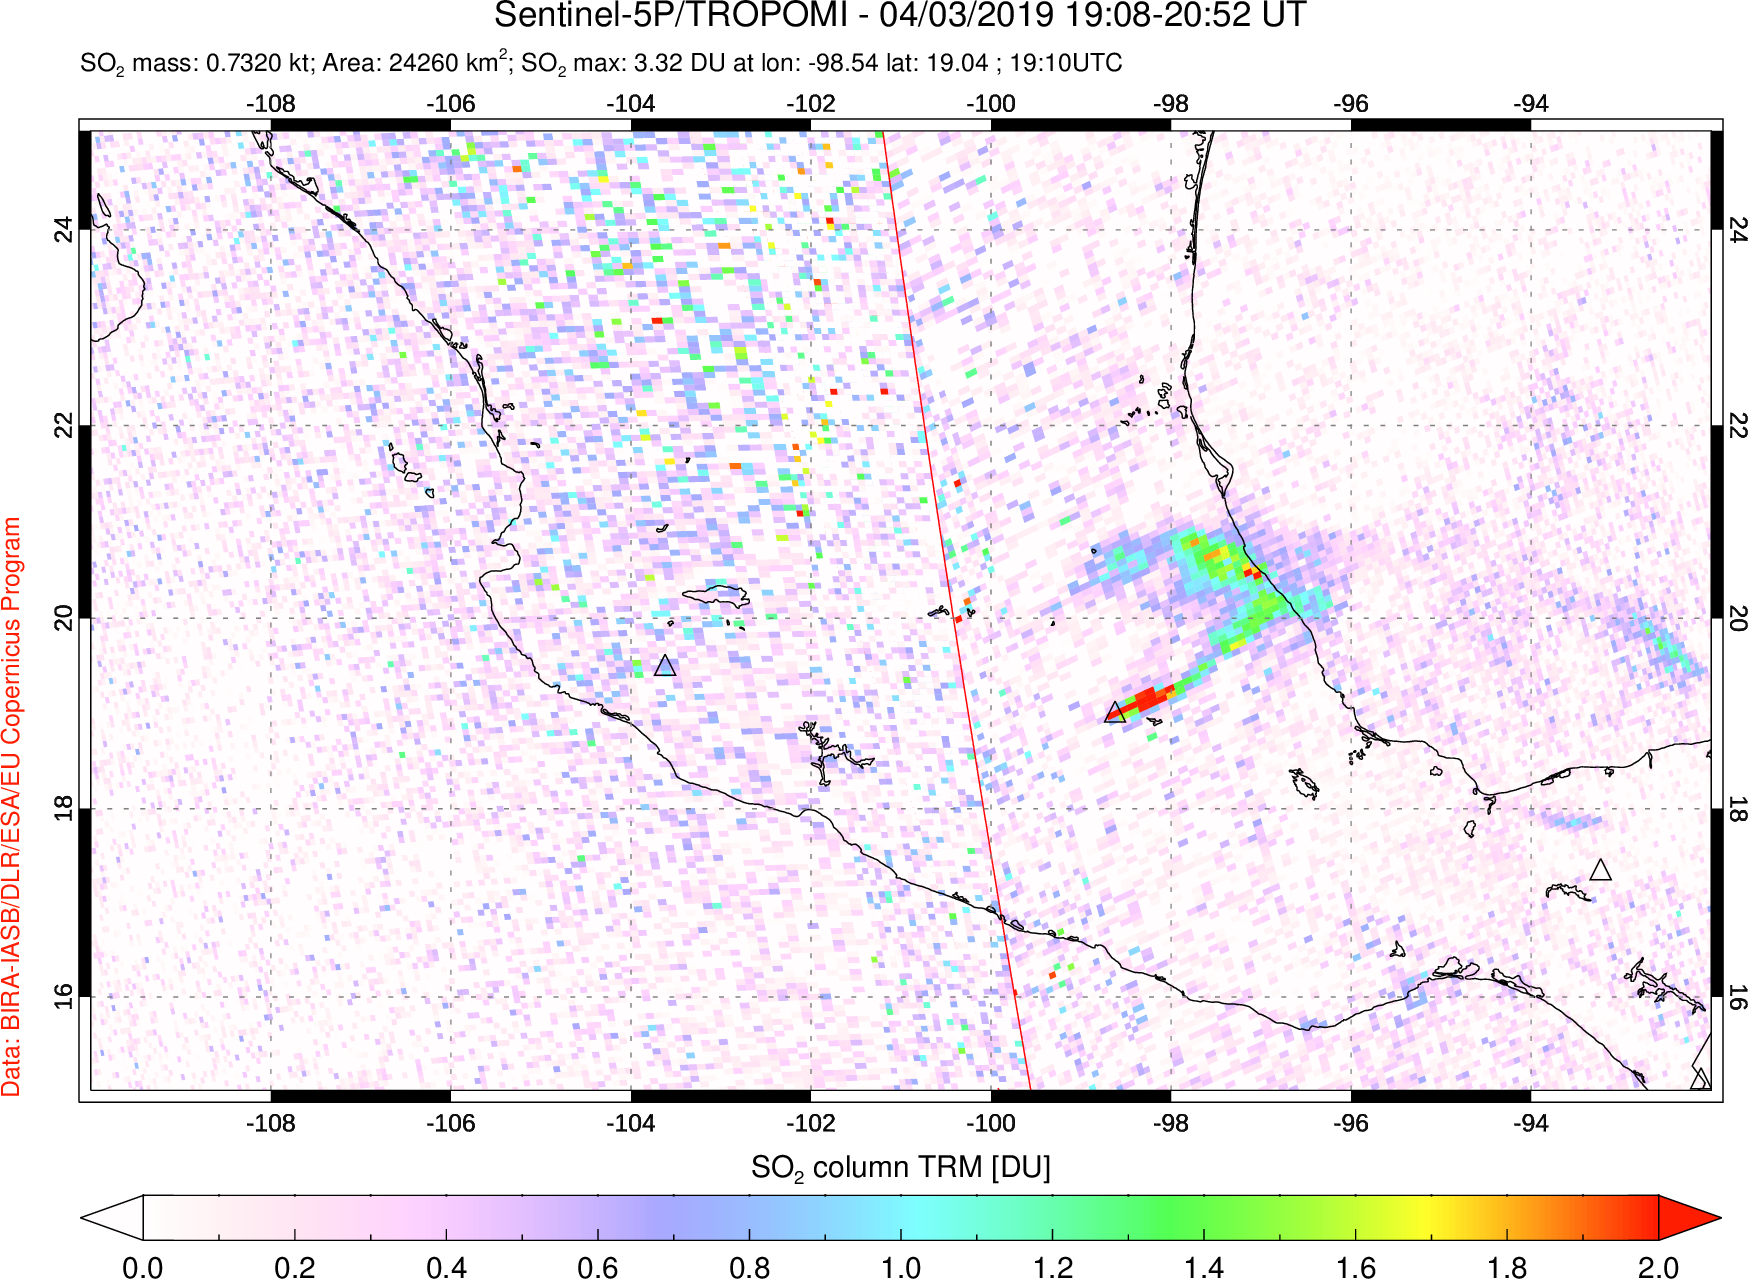 A sulfur dioxide image over Mexico on Apr 03, 2019.